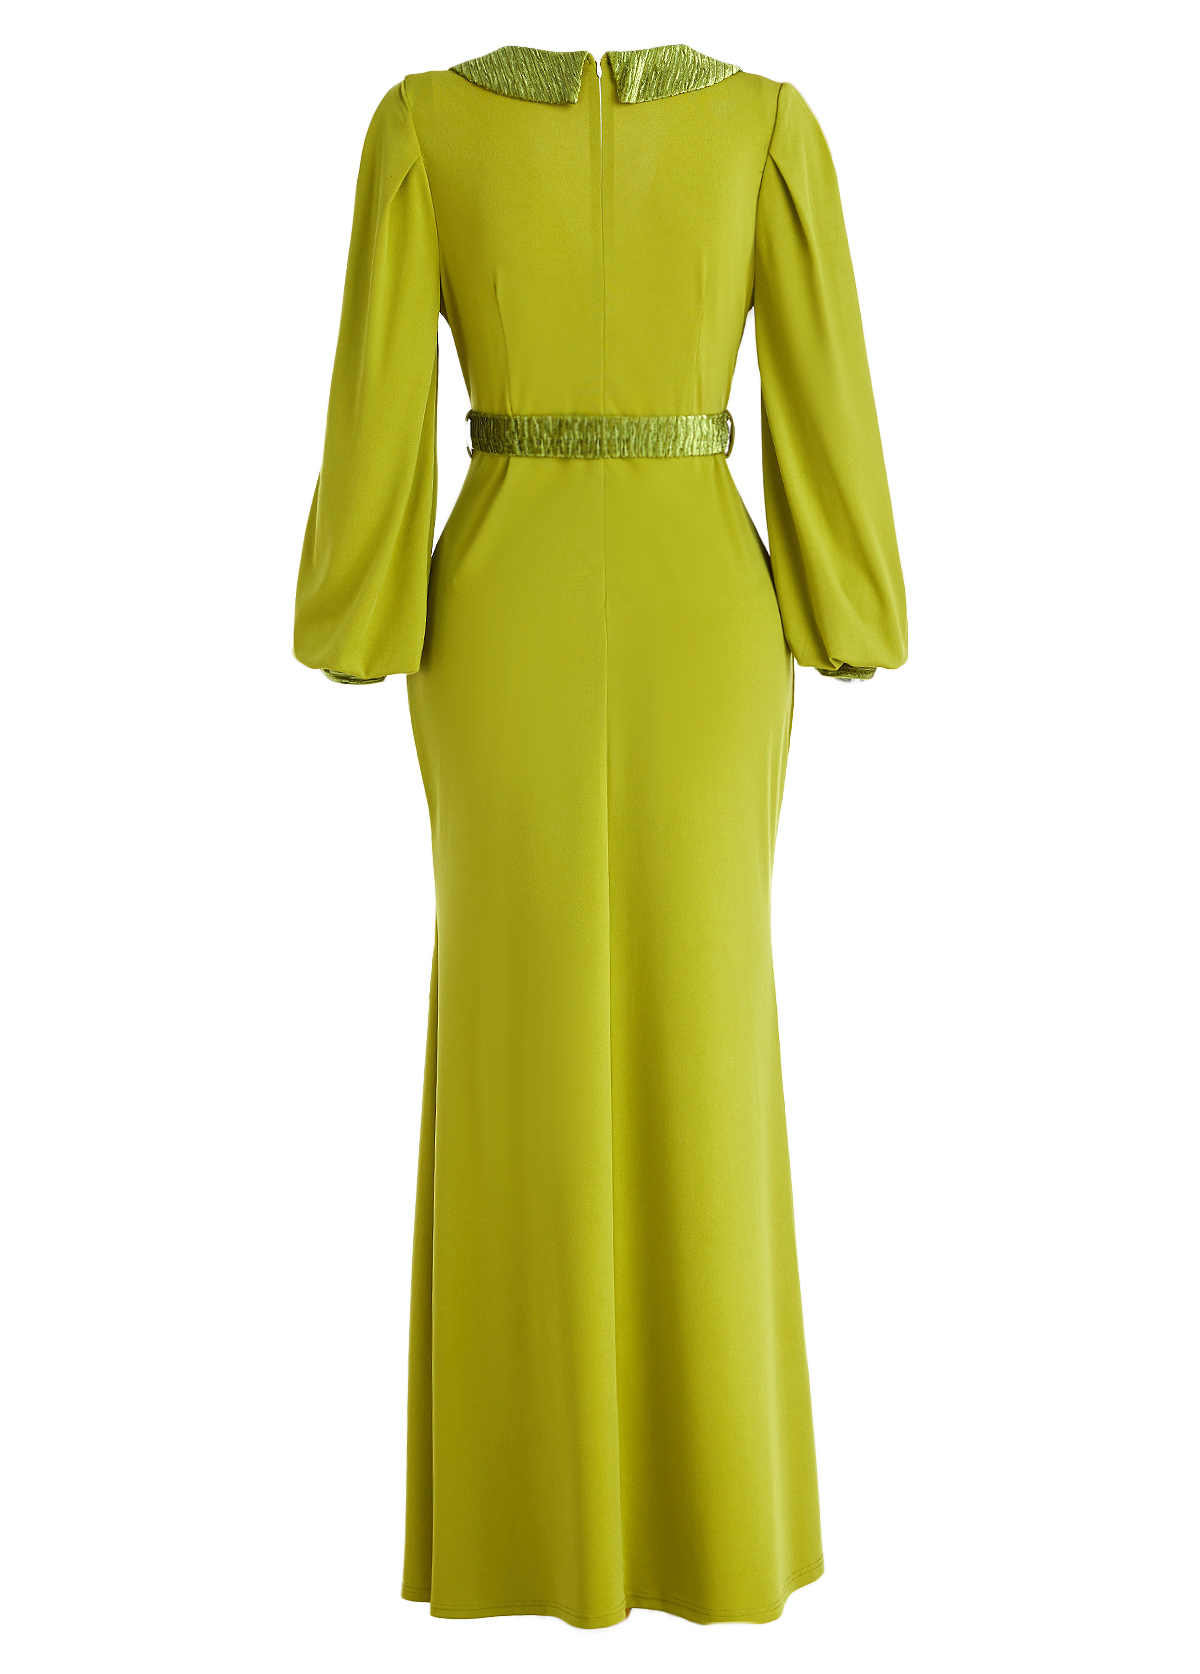 Patchwork Belted Mustard Yellow Maxi Bodycon Dress